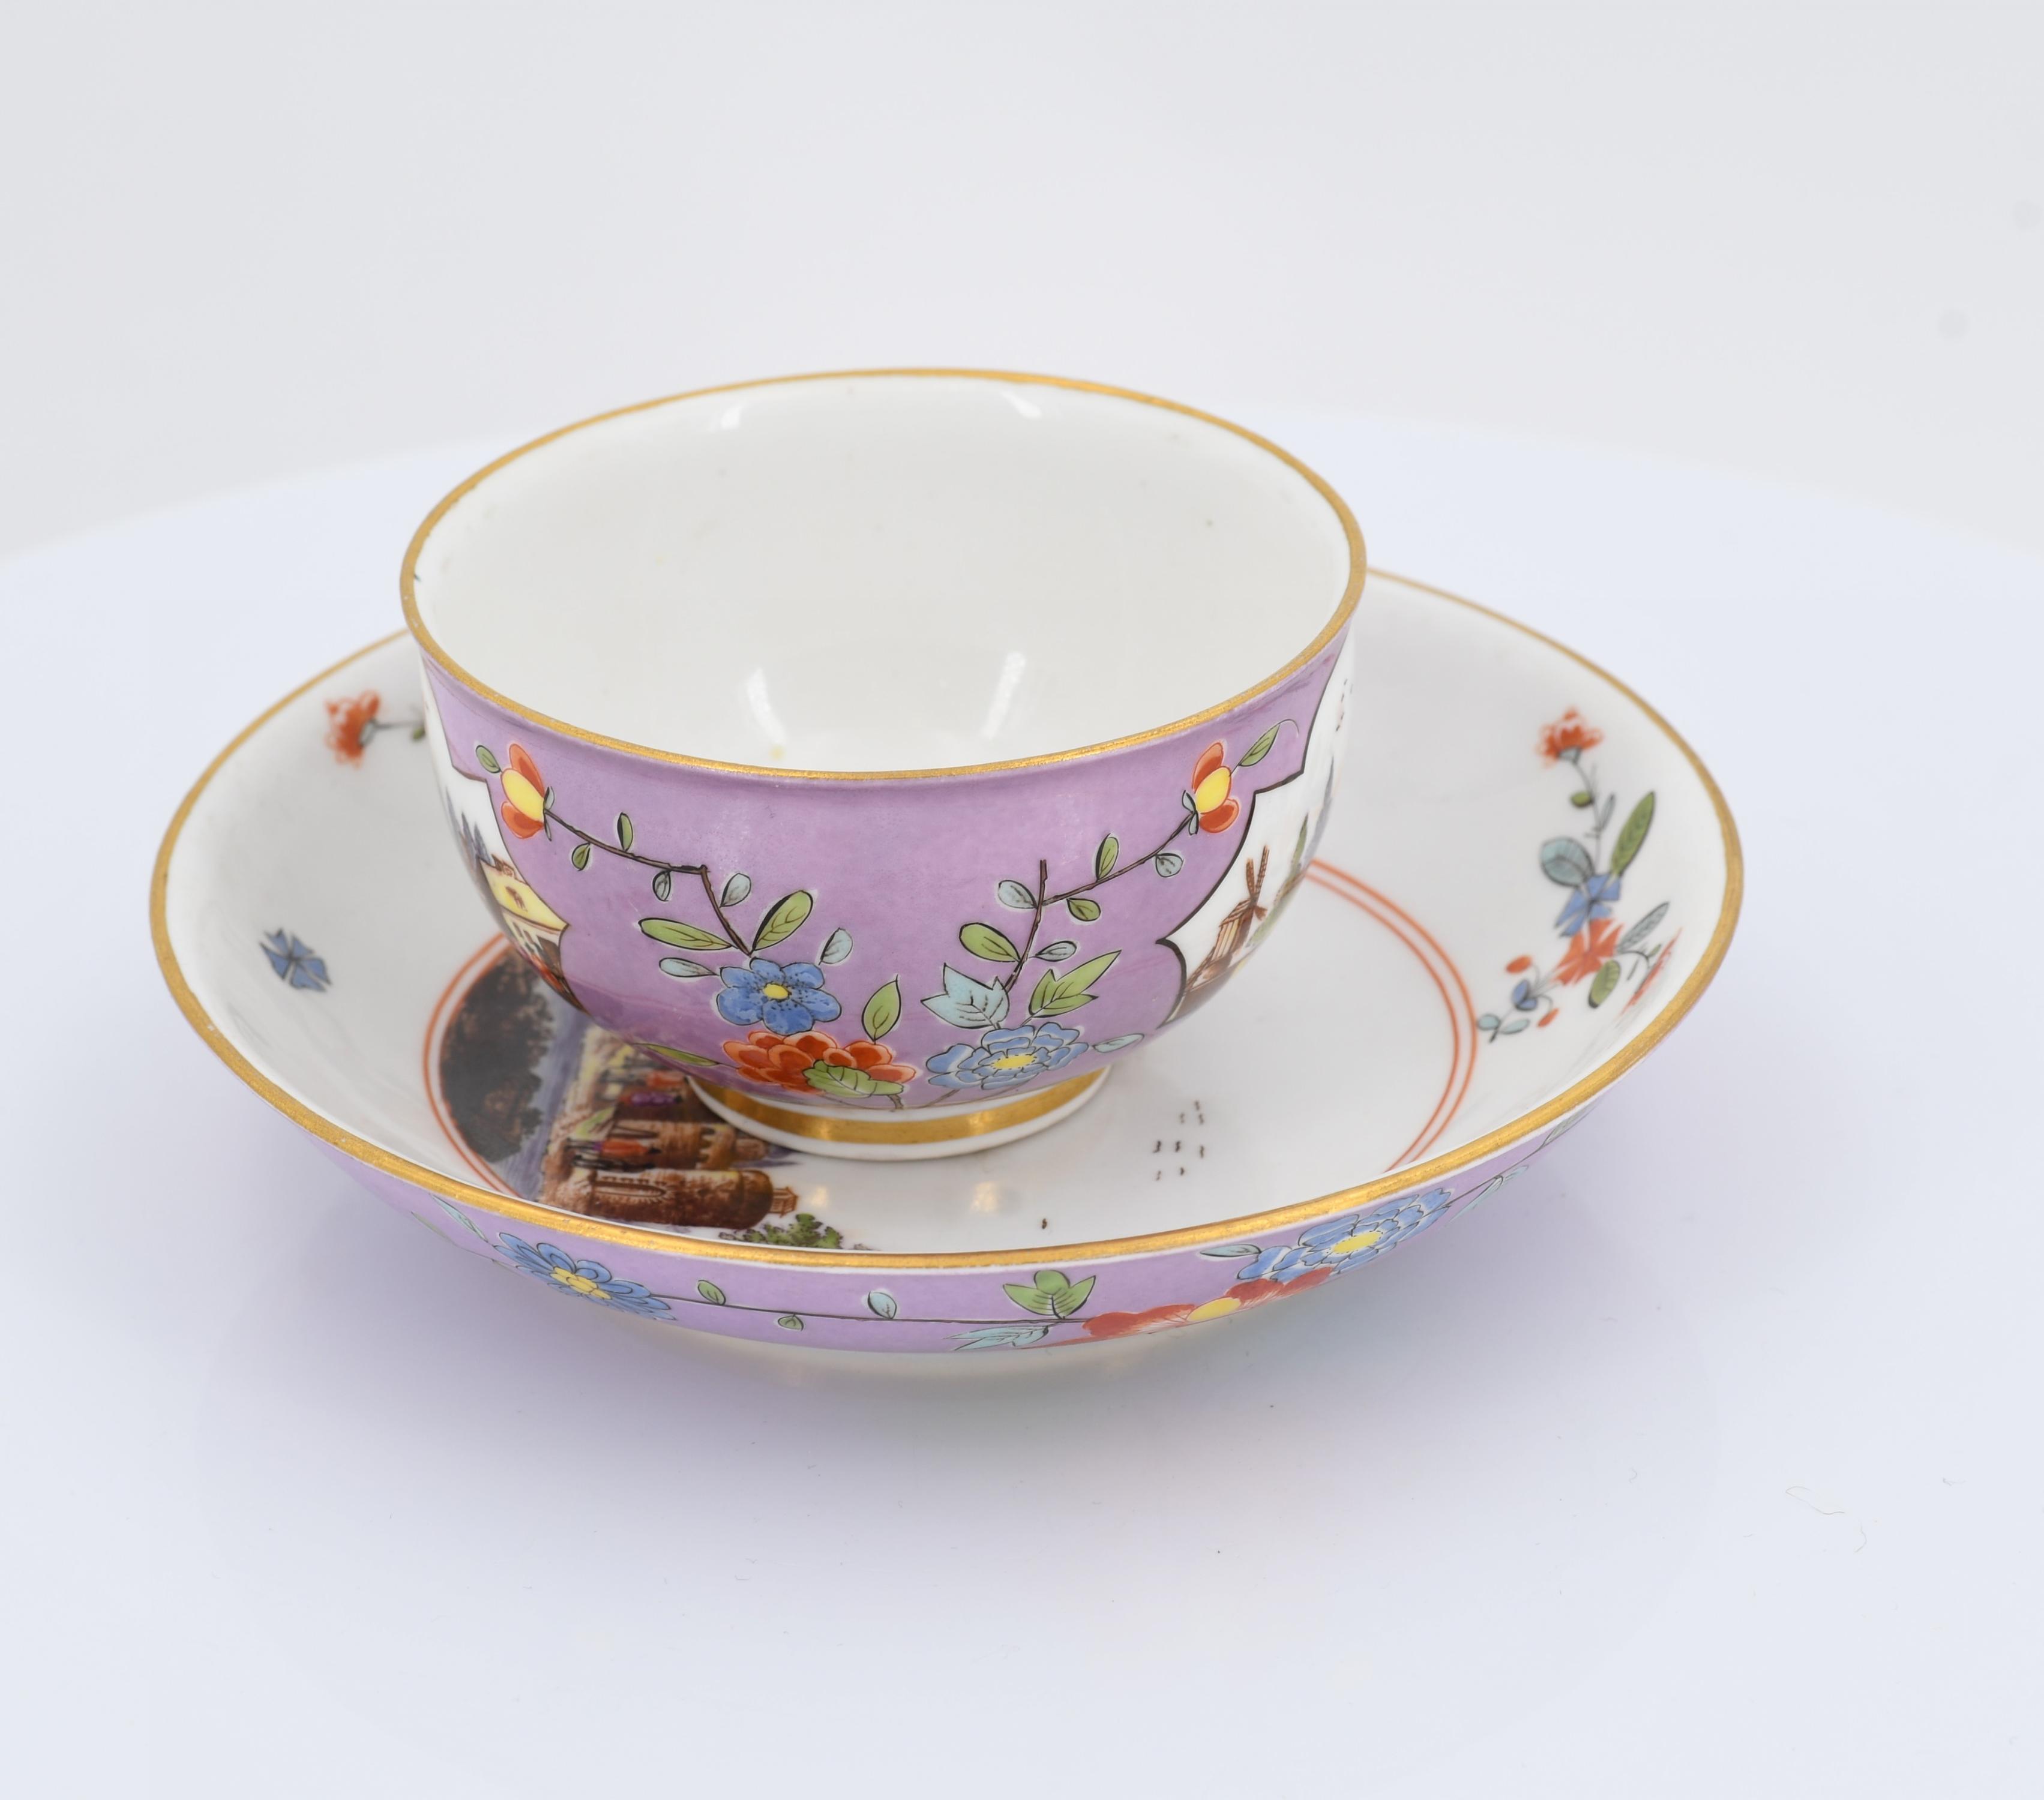 Tea bowl and saucer with merchant navy scenes - Image 3 of 7